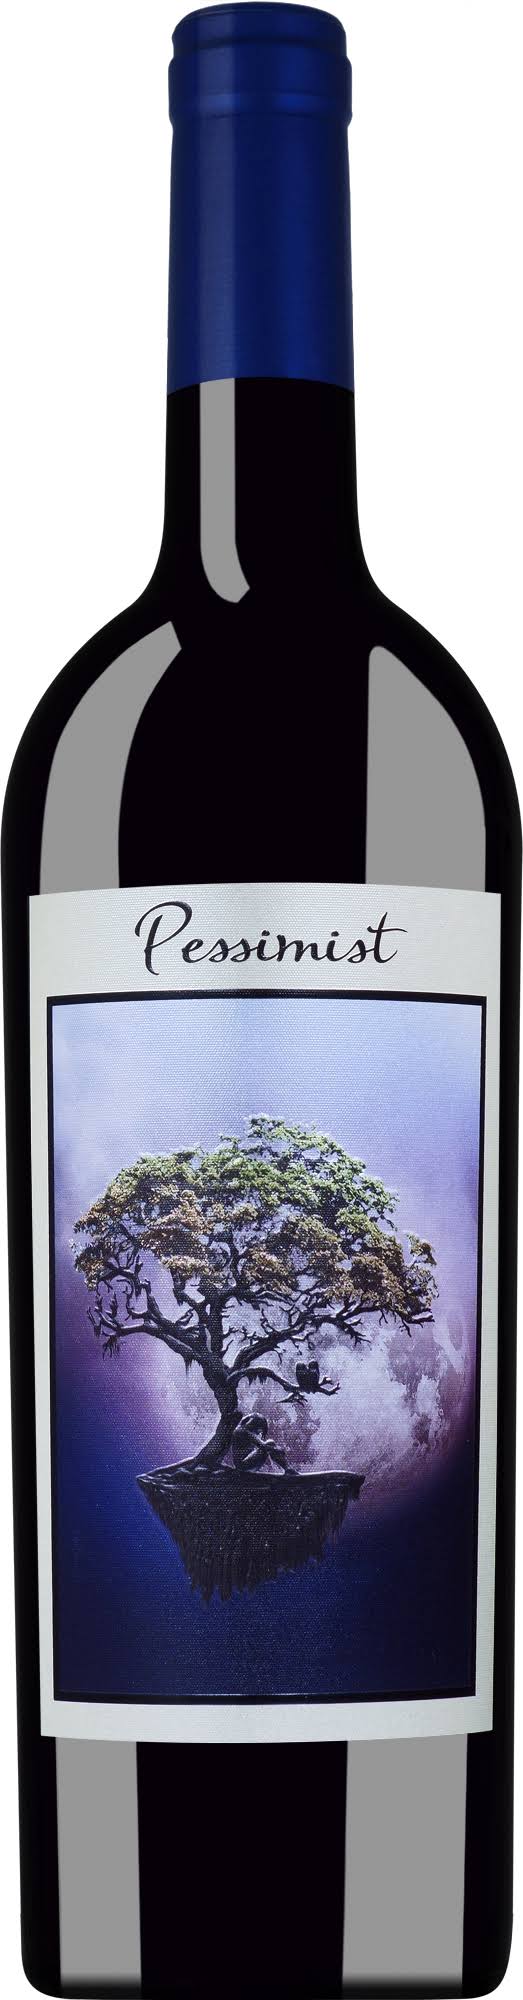 Daou Pessimist Red Wine Blend 2018 75cL 15% ABV